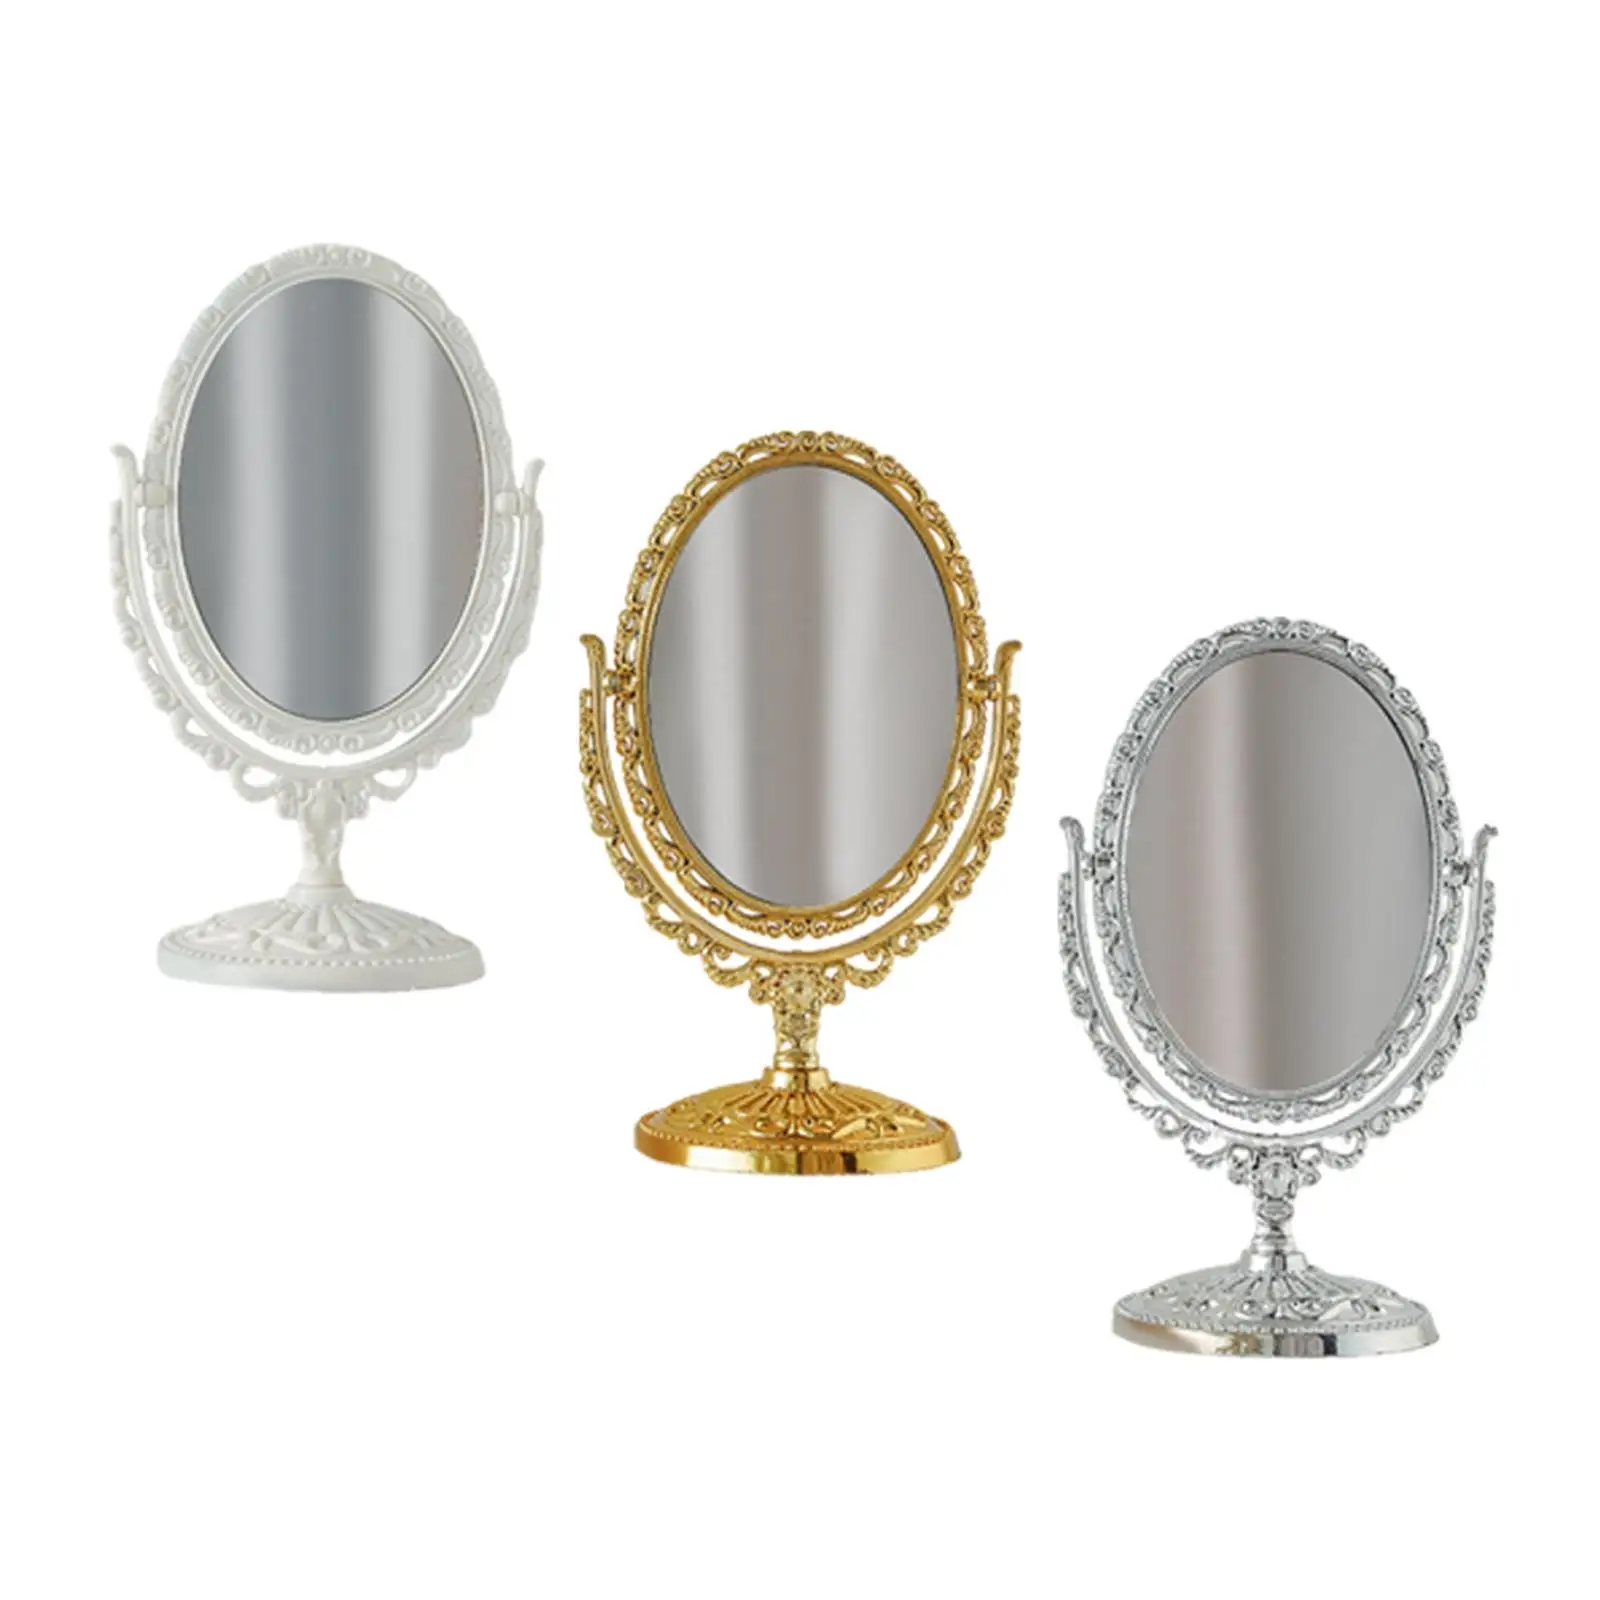 Small Retro Makeup Mirror Cosmetic Mirror Tabletop Mirror for Dressing Table Women Grils